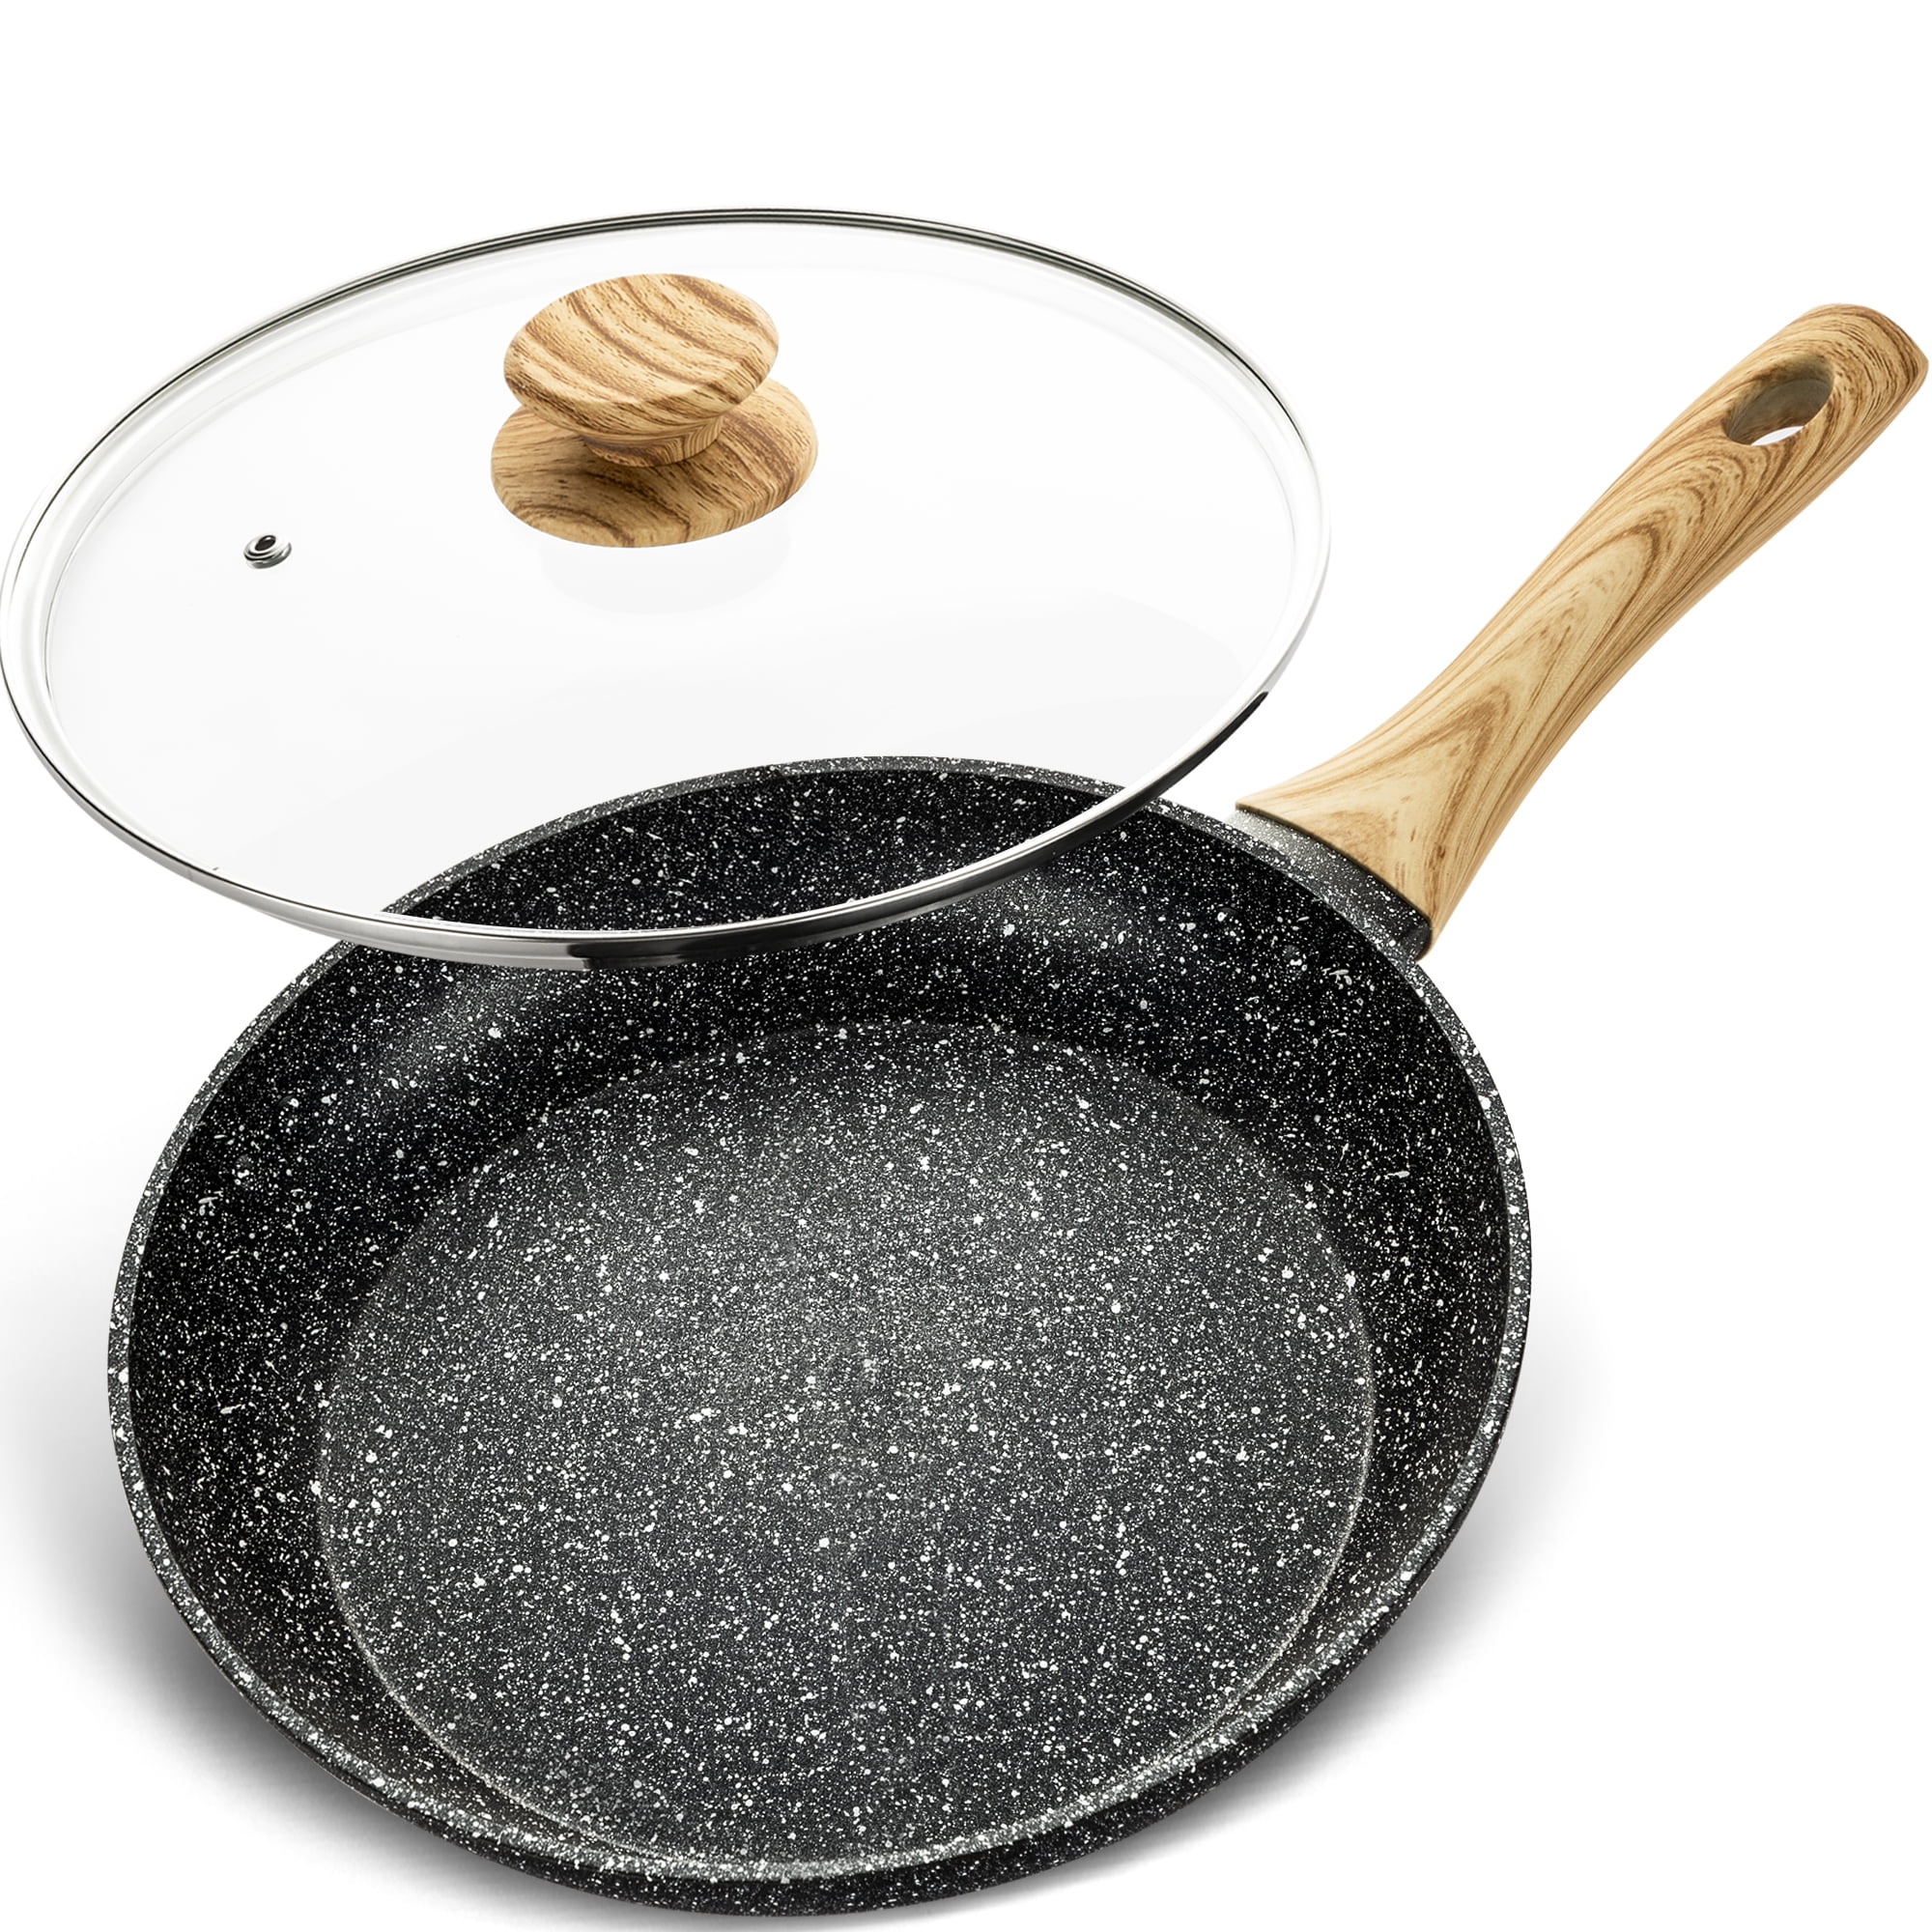 Dropship Hammered 10 Inch, Non-Stick Frying Pan With Lid, Ceramic